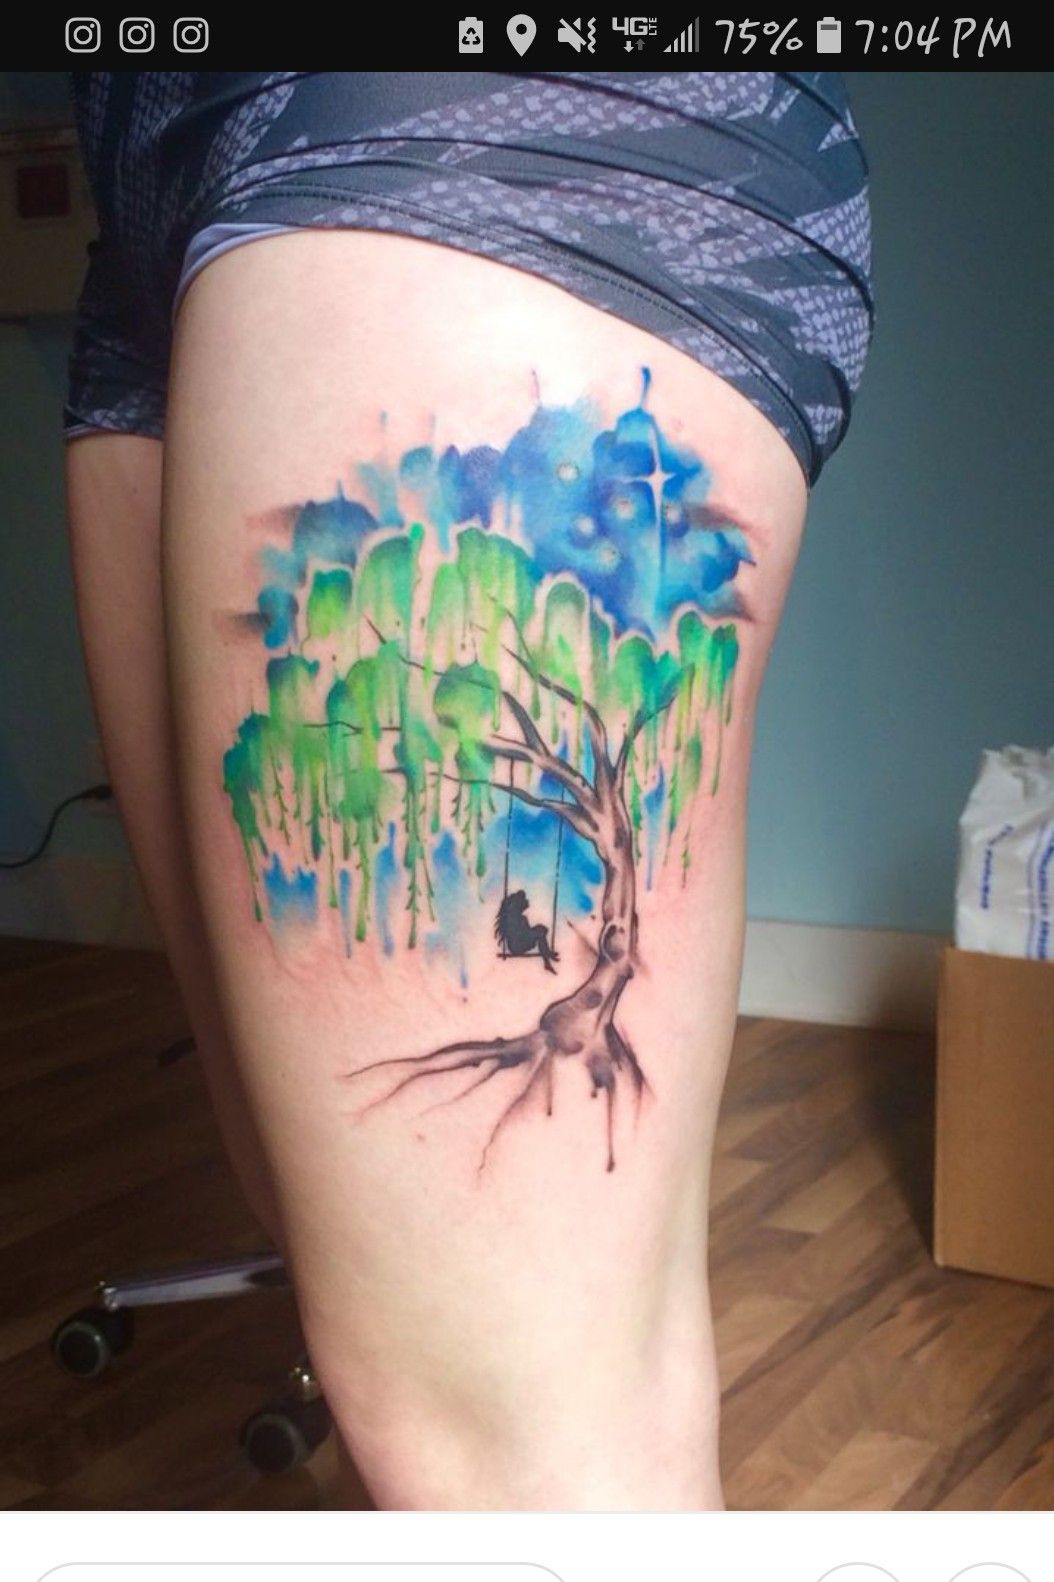 Weeping willow tattoo in a rectangle tattooed on the right forearm  Willow  tree tattoos Weeping willow tattoo Tree tattoo arm